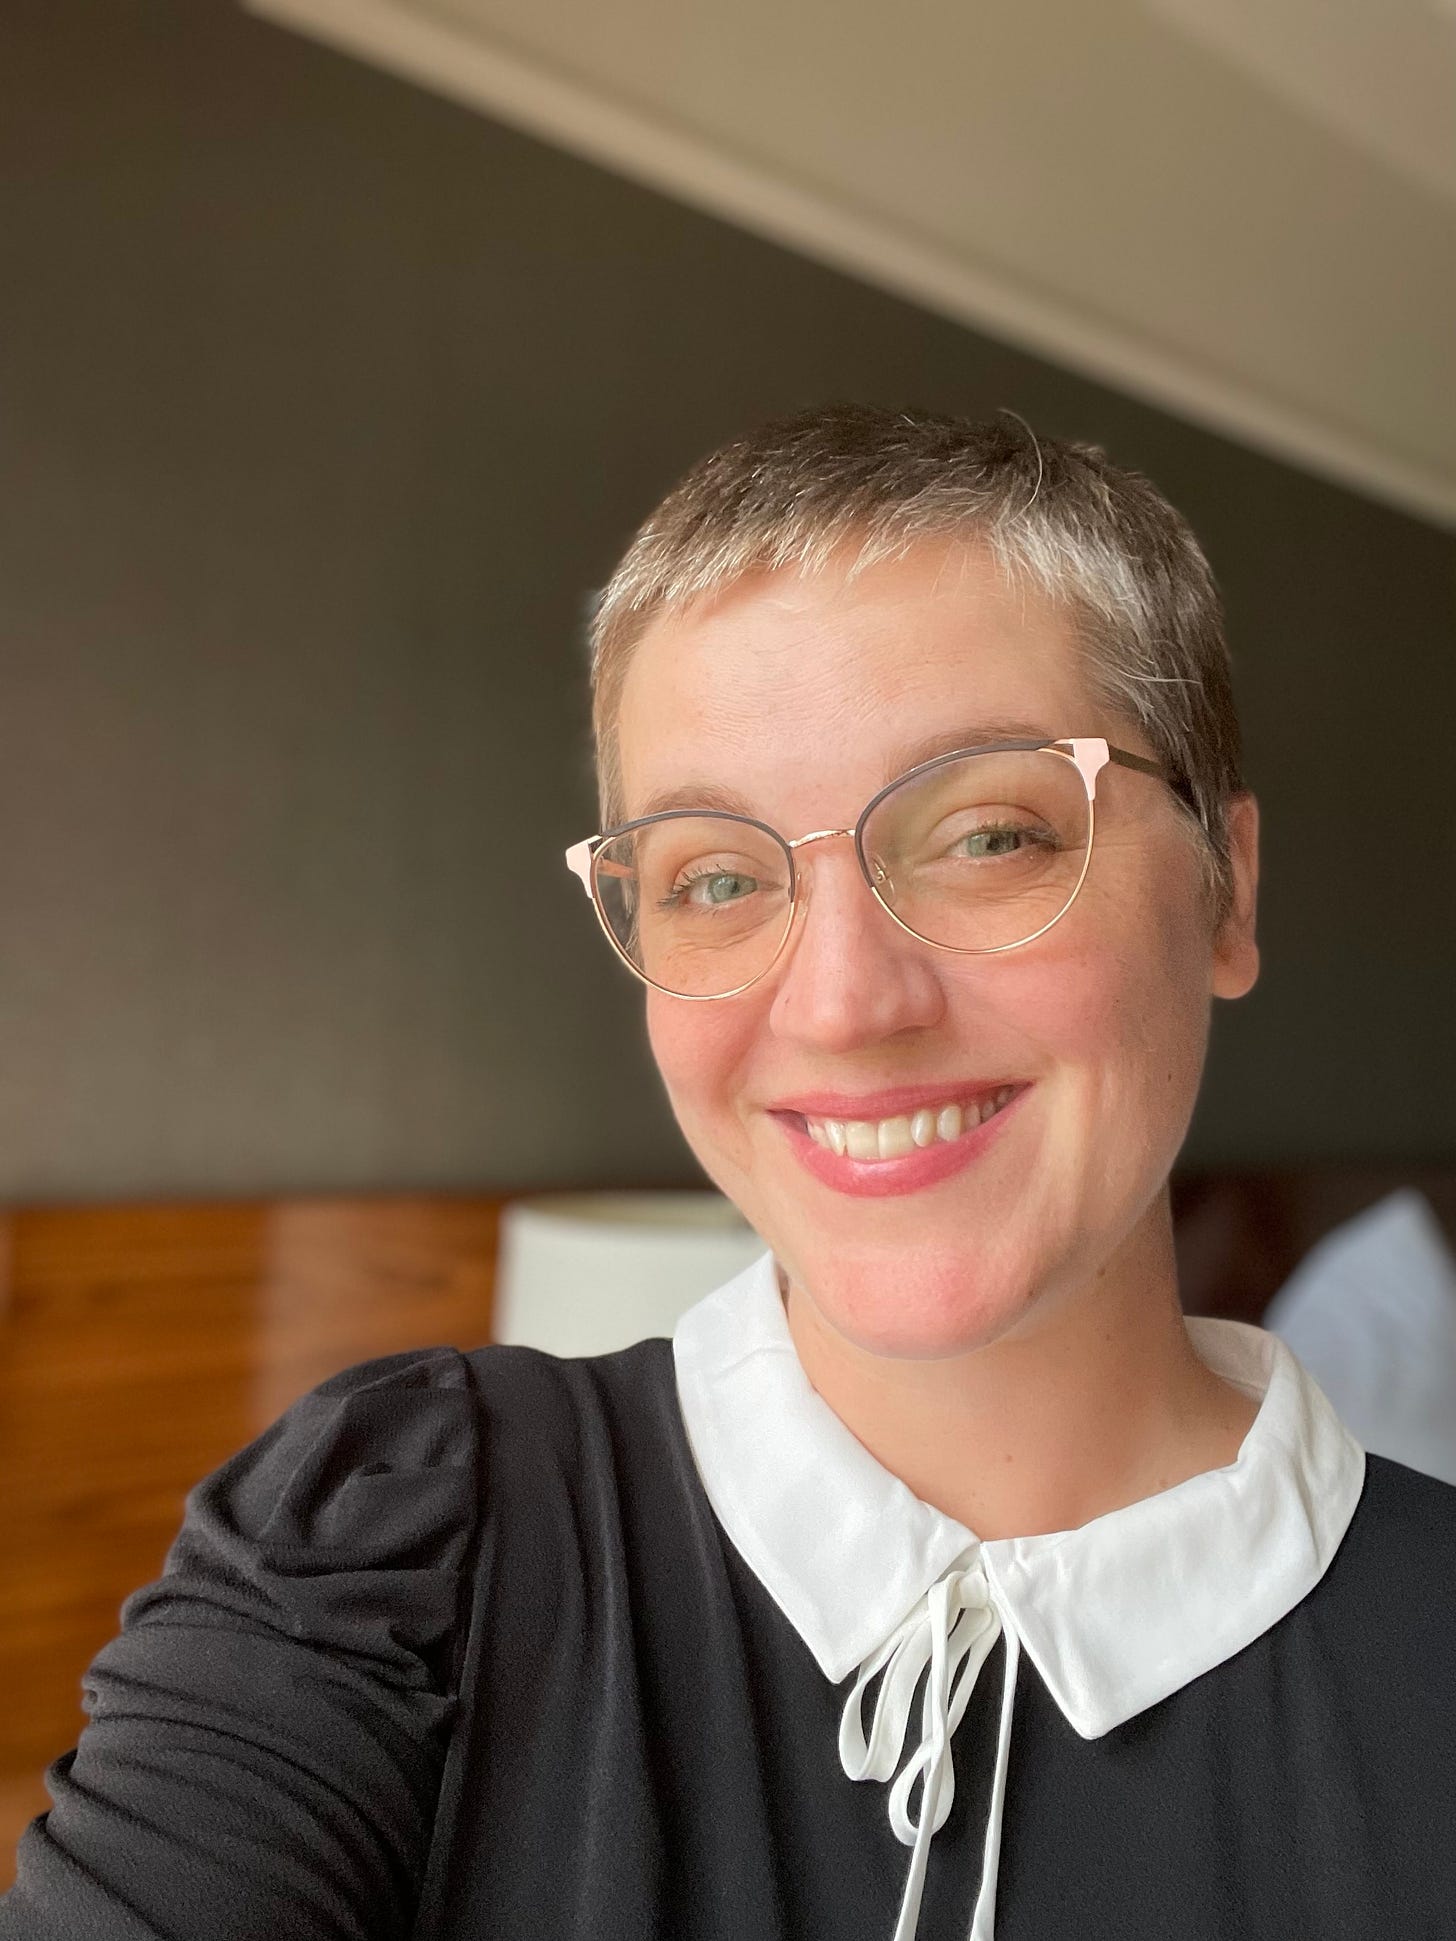 a white person socialied as female with super short hair is smiling at the camera.They are waring gold rimmed glasses and a tiny bit of makeup. They have on a black shirt with a white peter-pan collar, and sort of look like a quaker minister. 